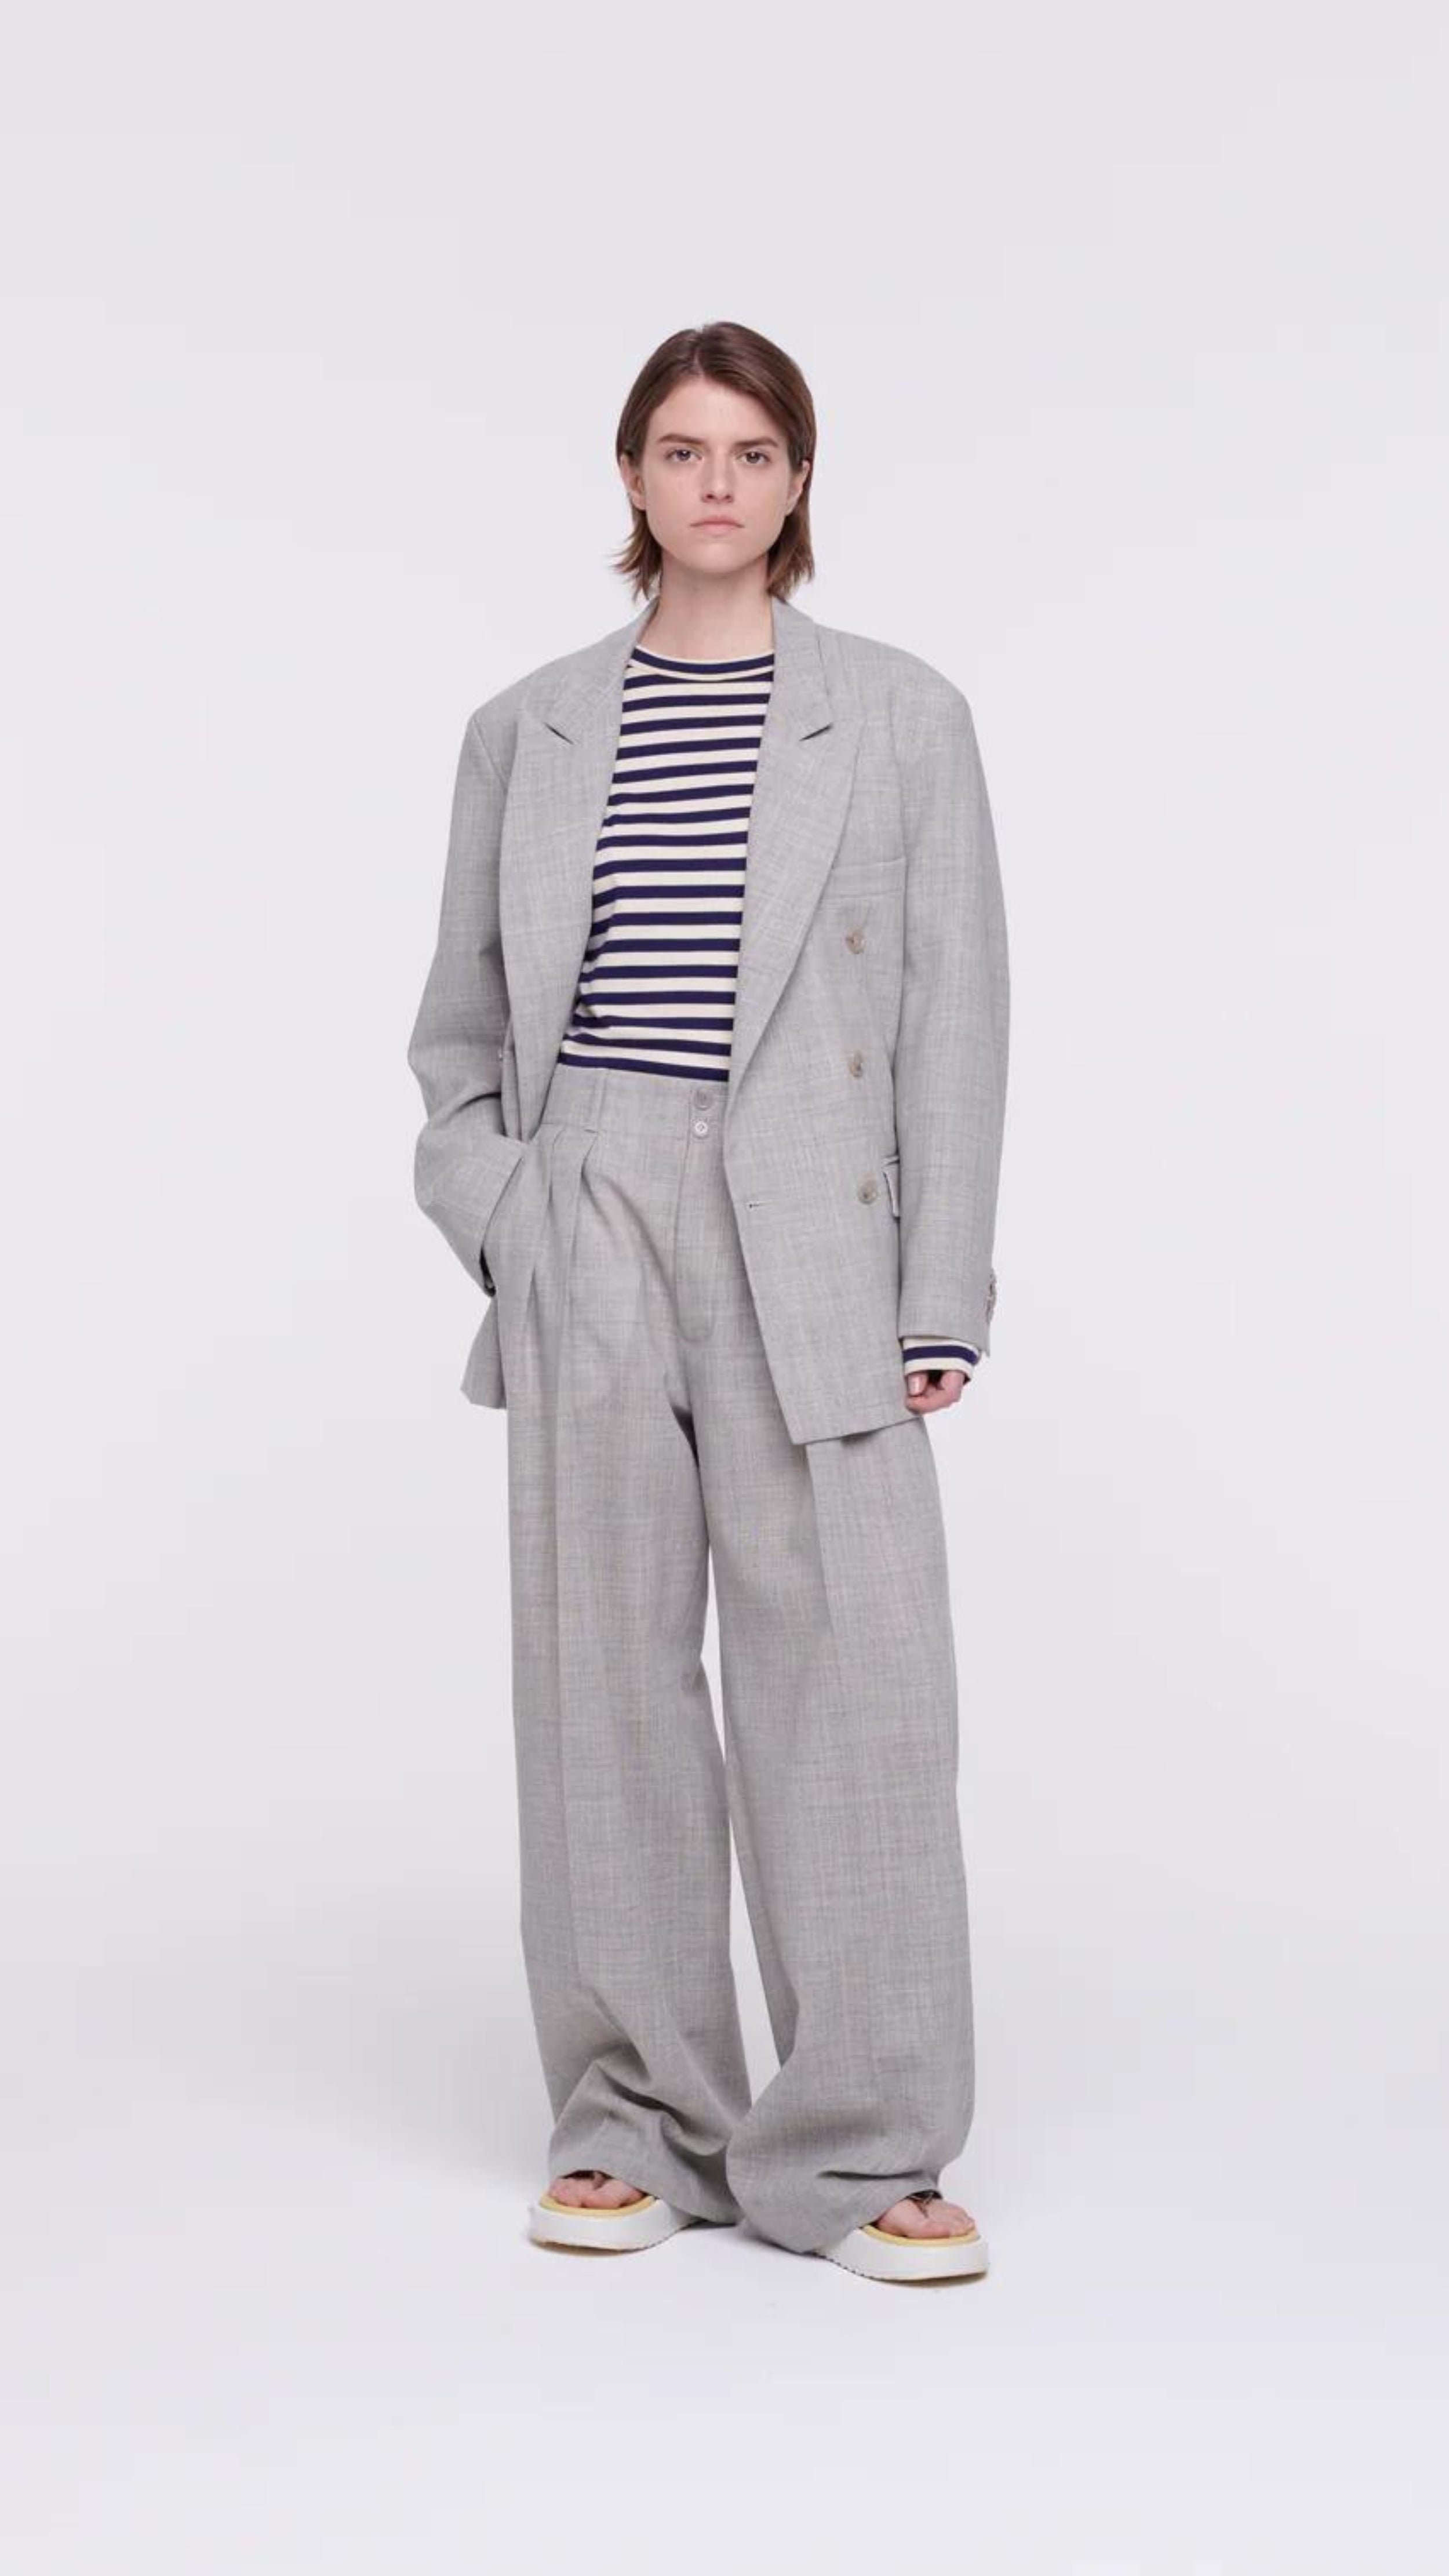 Plan C Pleated Melange Wide Leg Pants. tailored-cut and high-rise fit and wide leg trouser. With double pleating, button fastening closure, and pockets. Made in Italy from a light weight grey melange wool panama weave. Photo shown on model.